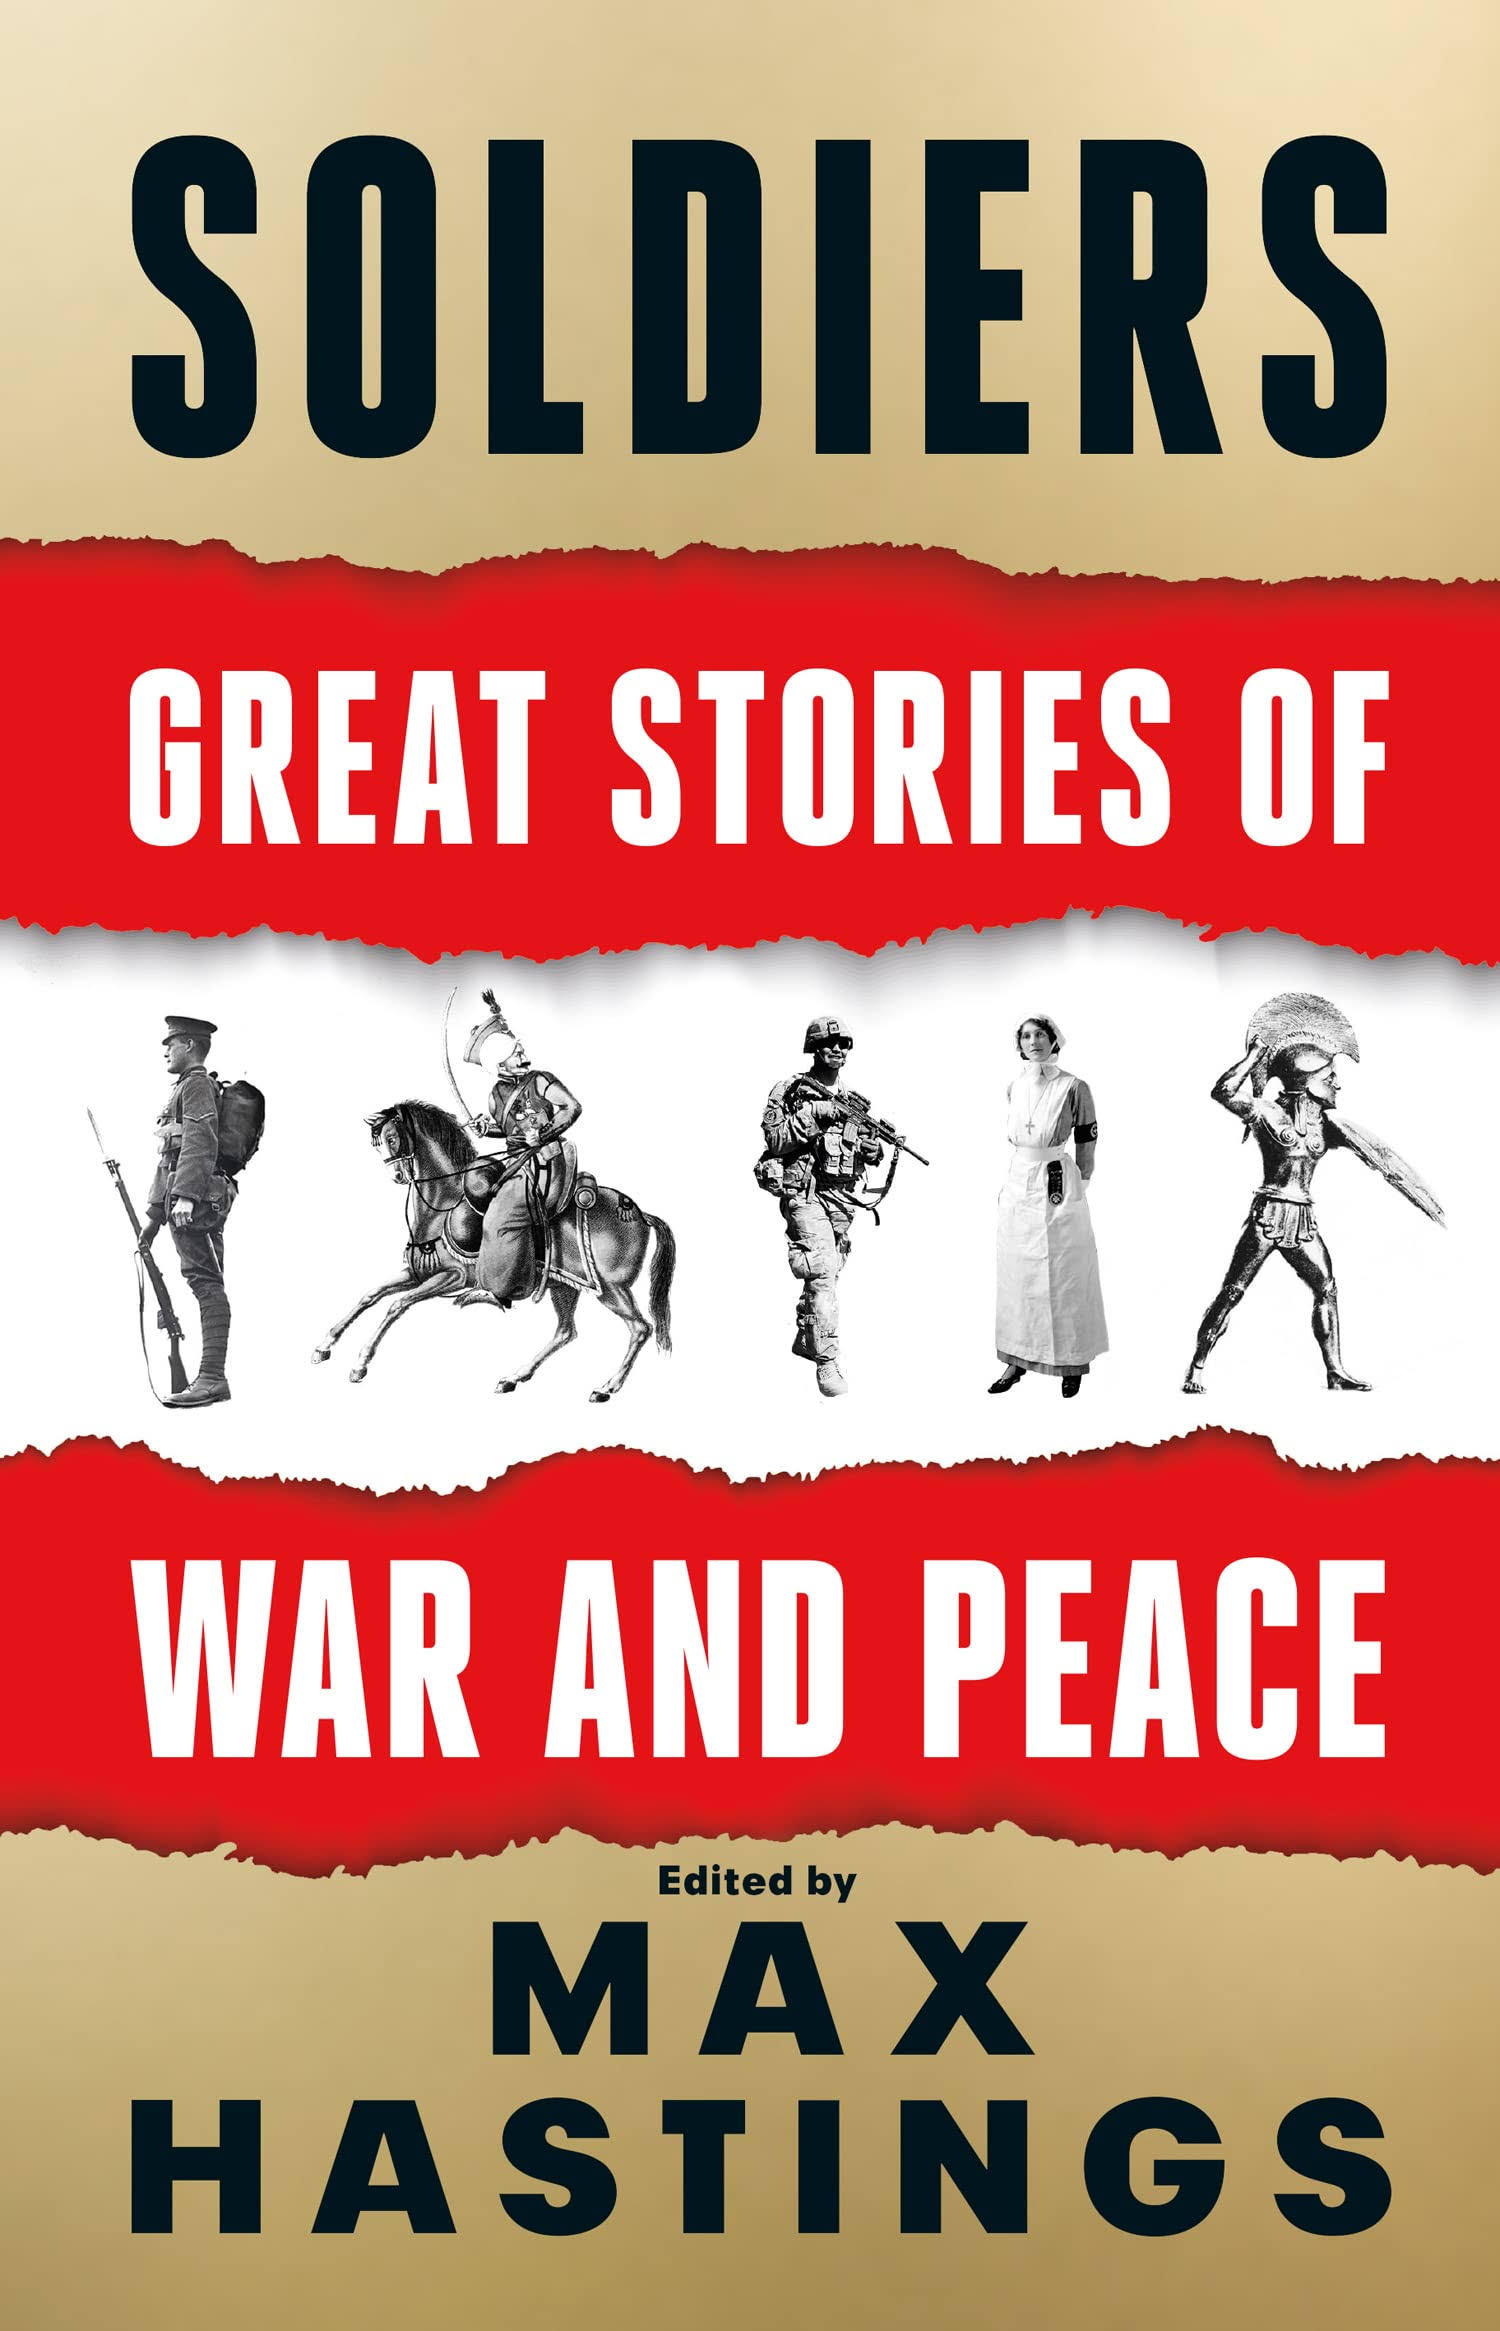 Soldiers by Max Hastings